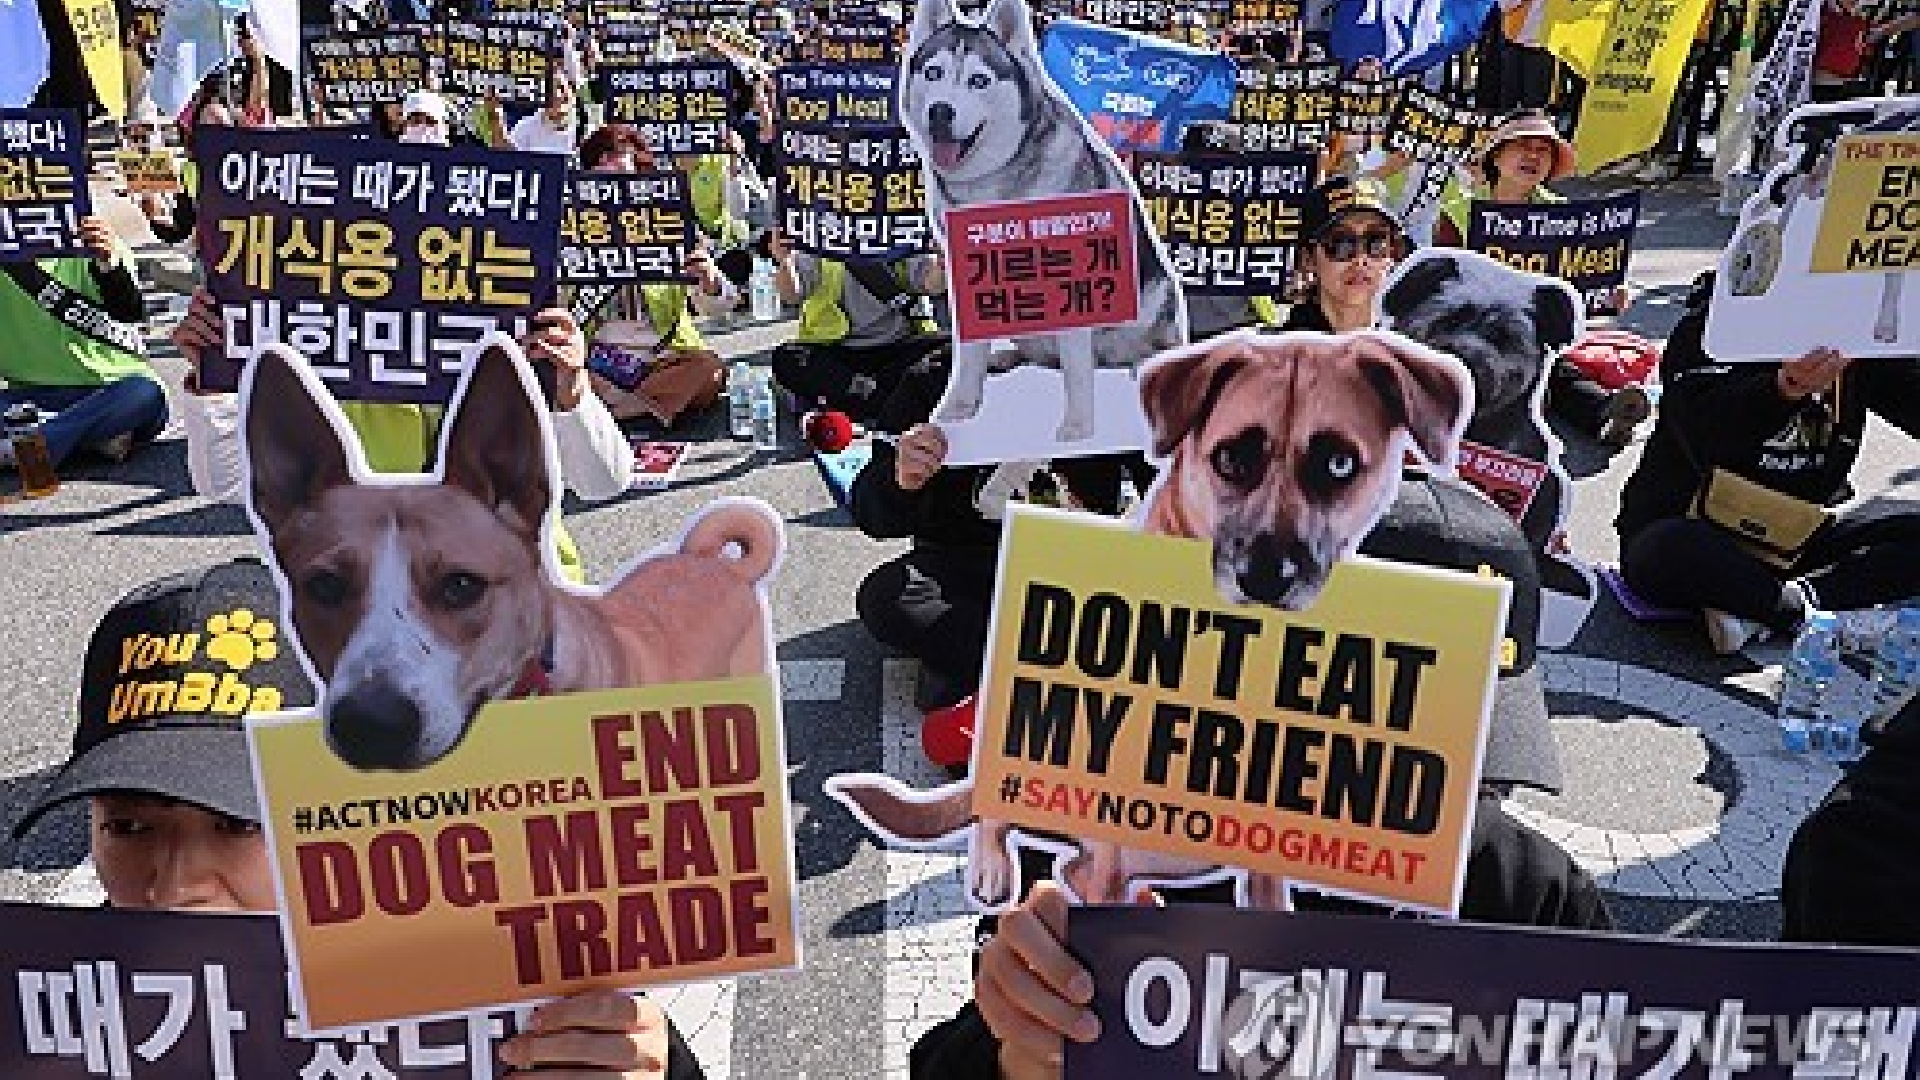 On Tuesday, the South Korean parliament is anticipated to decide whether to gradually outlaw the consumption and sale of dog meat.